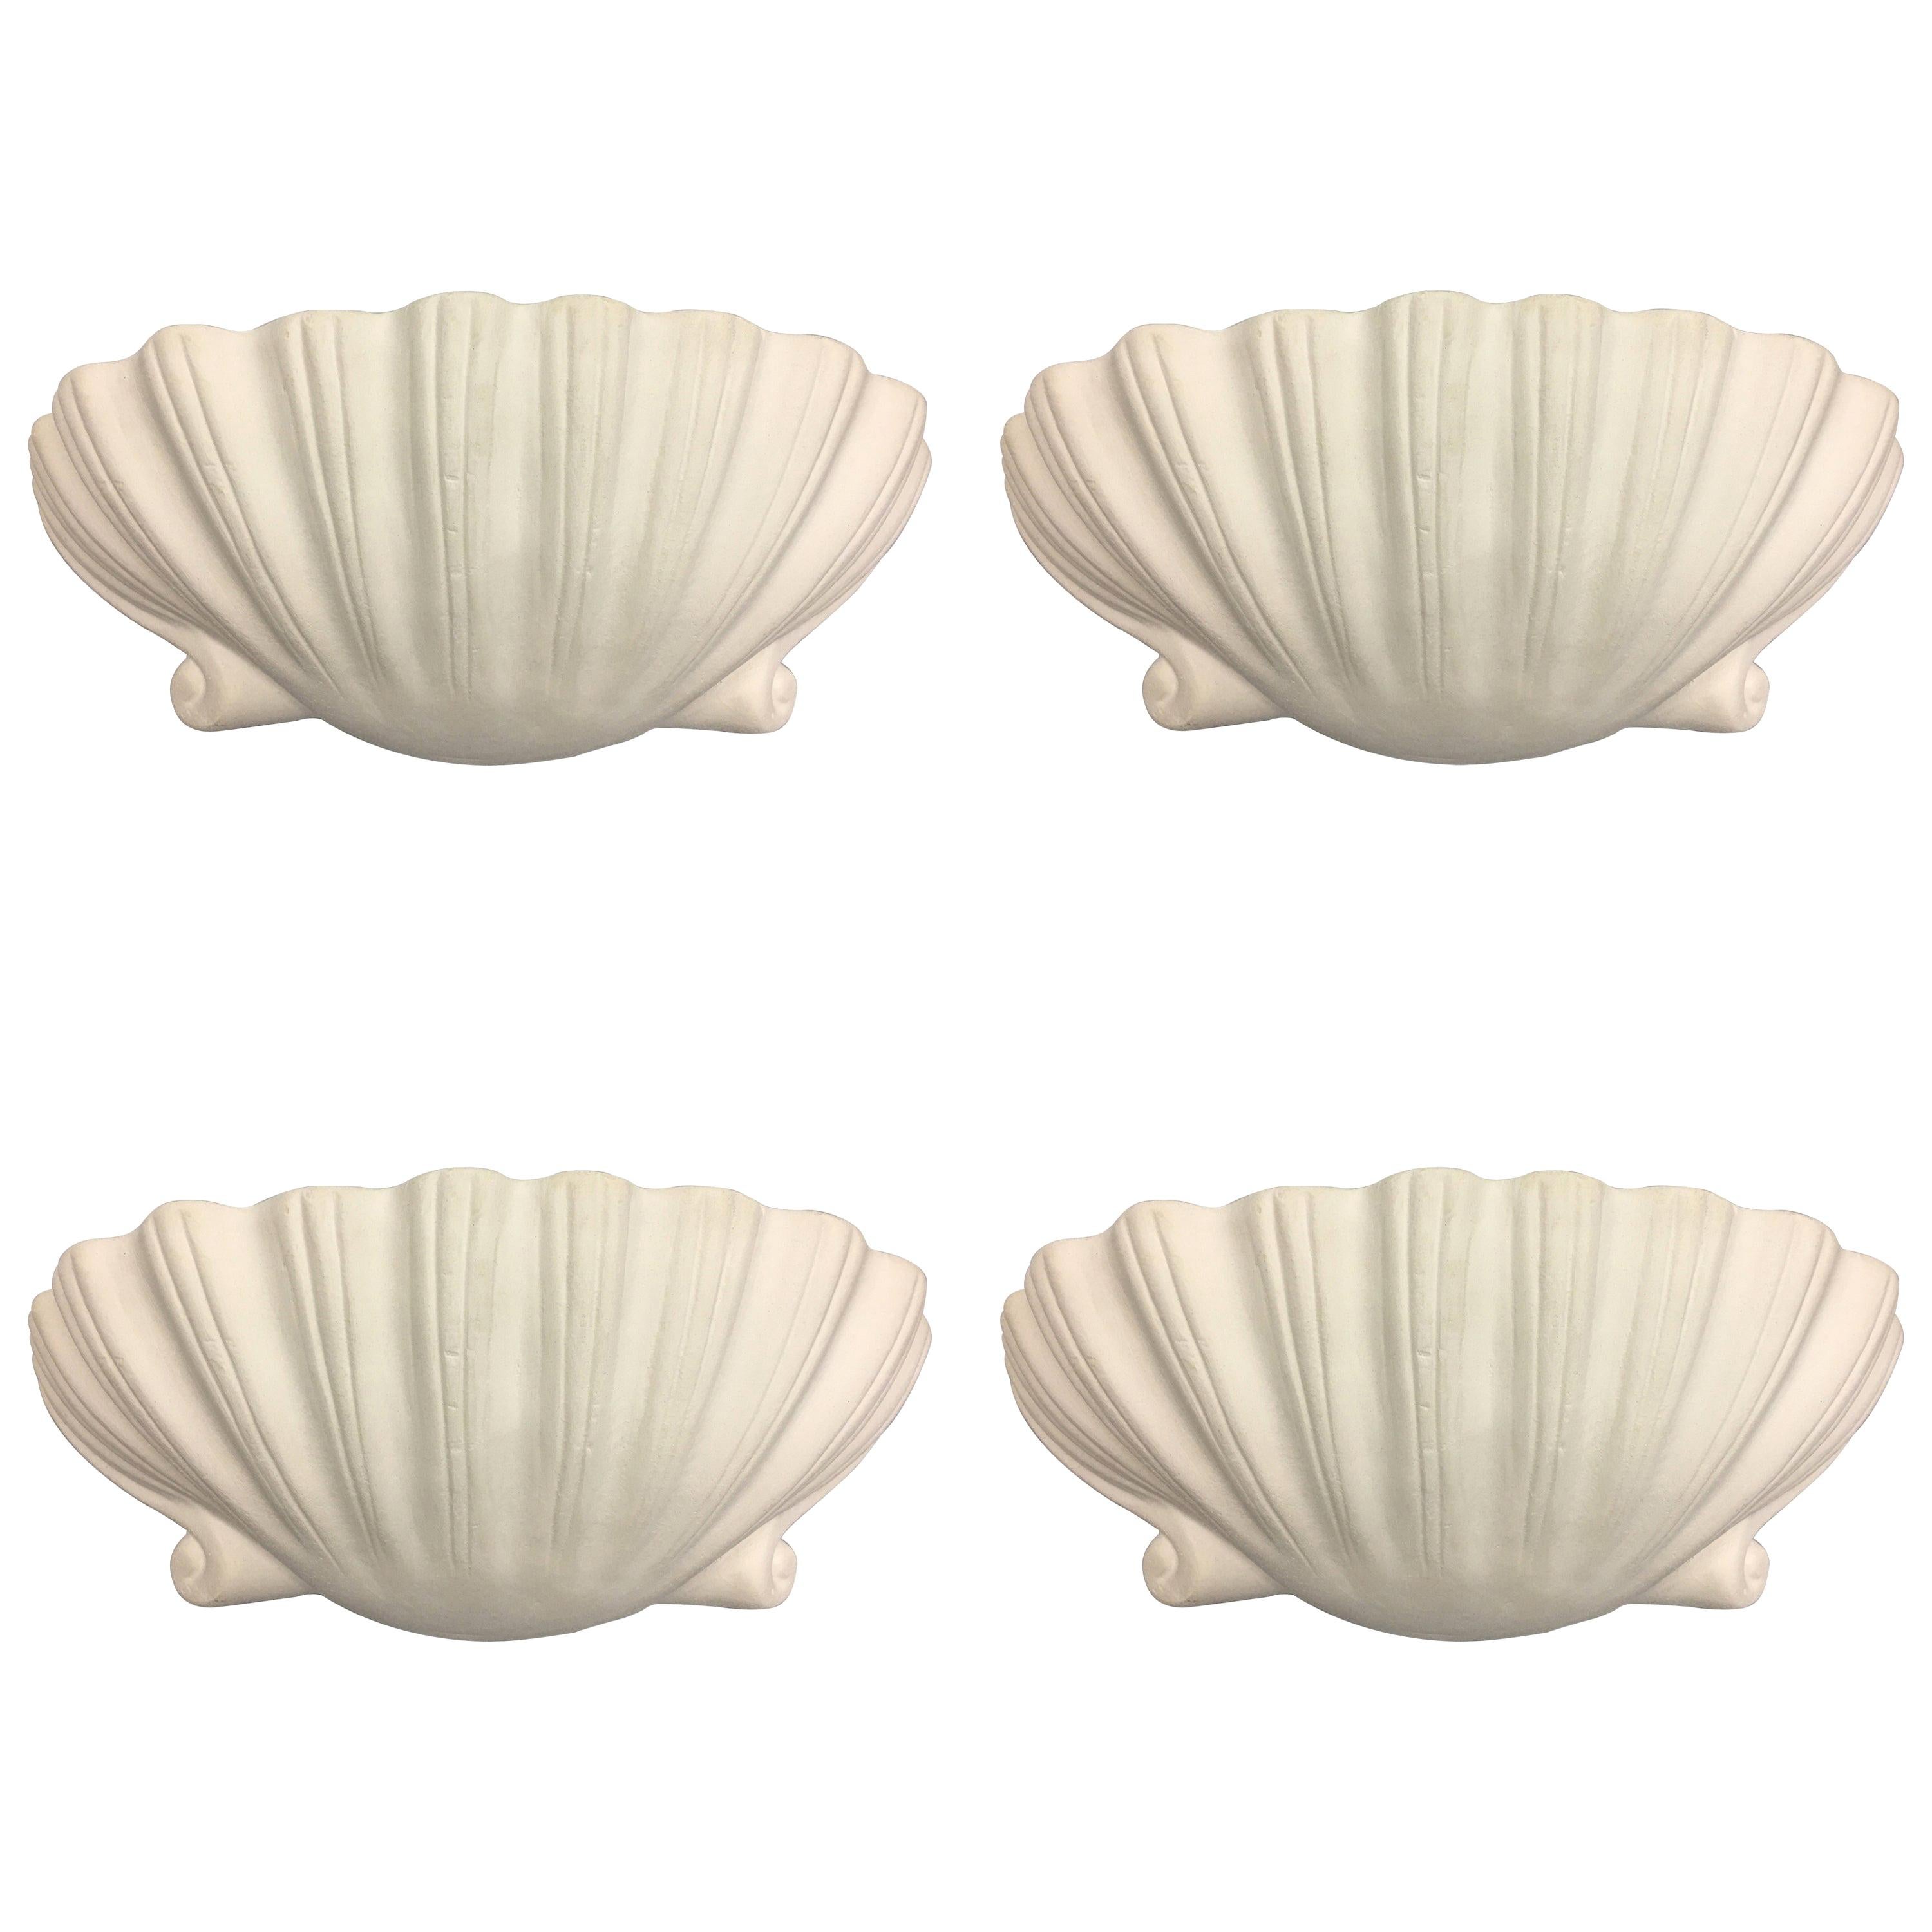 2 Pairs Mid-Century Modern Plaster Shell Wall Sconces, Attributed to Serge Roche